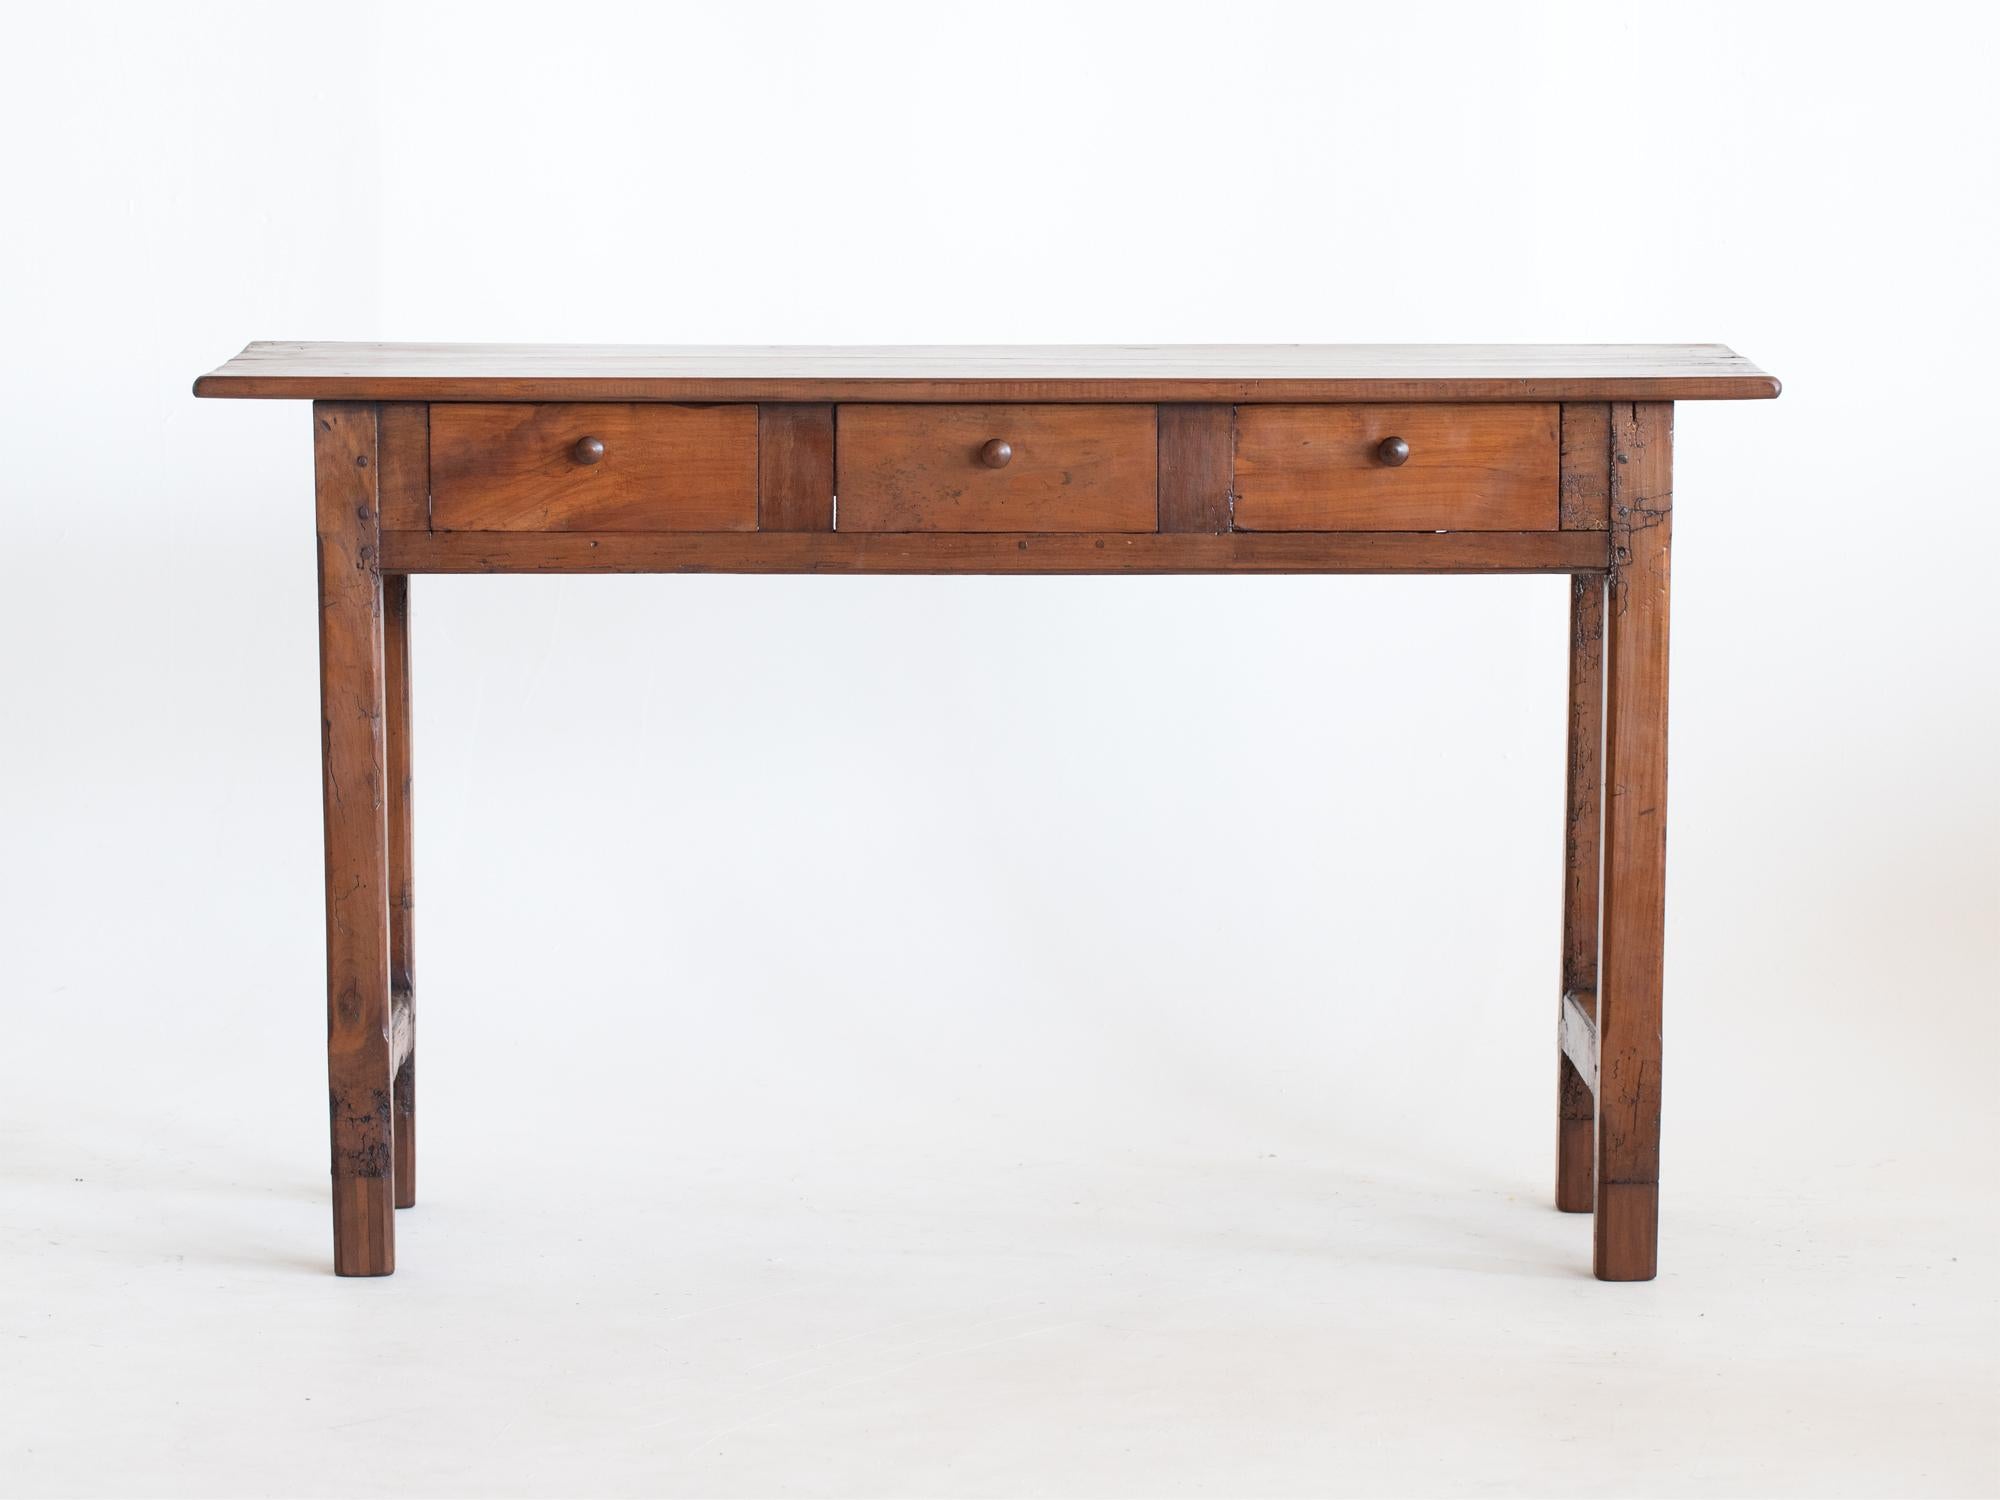 A three-drawer cherrywood serving table or console adapted from a larger 19C French farmhouse table.

Stock ref. #2177

In good sturdy order. Characterful wear to the aged timber. Treated and filled worm holes.

77 x 132 x 42.5 cm

30.3 x 52.0 x